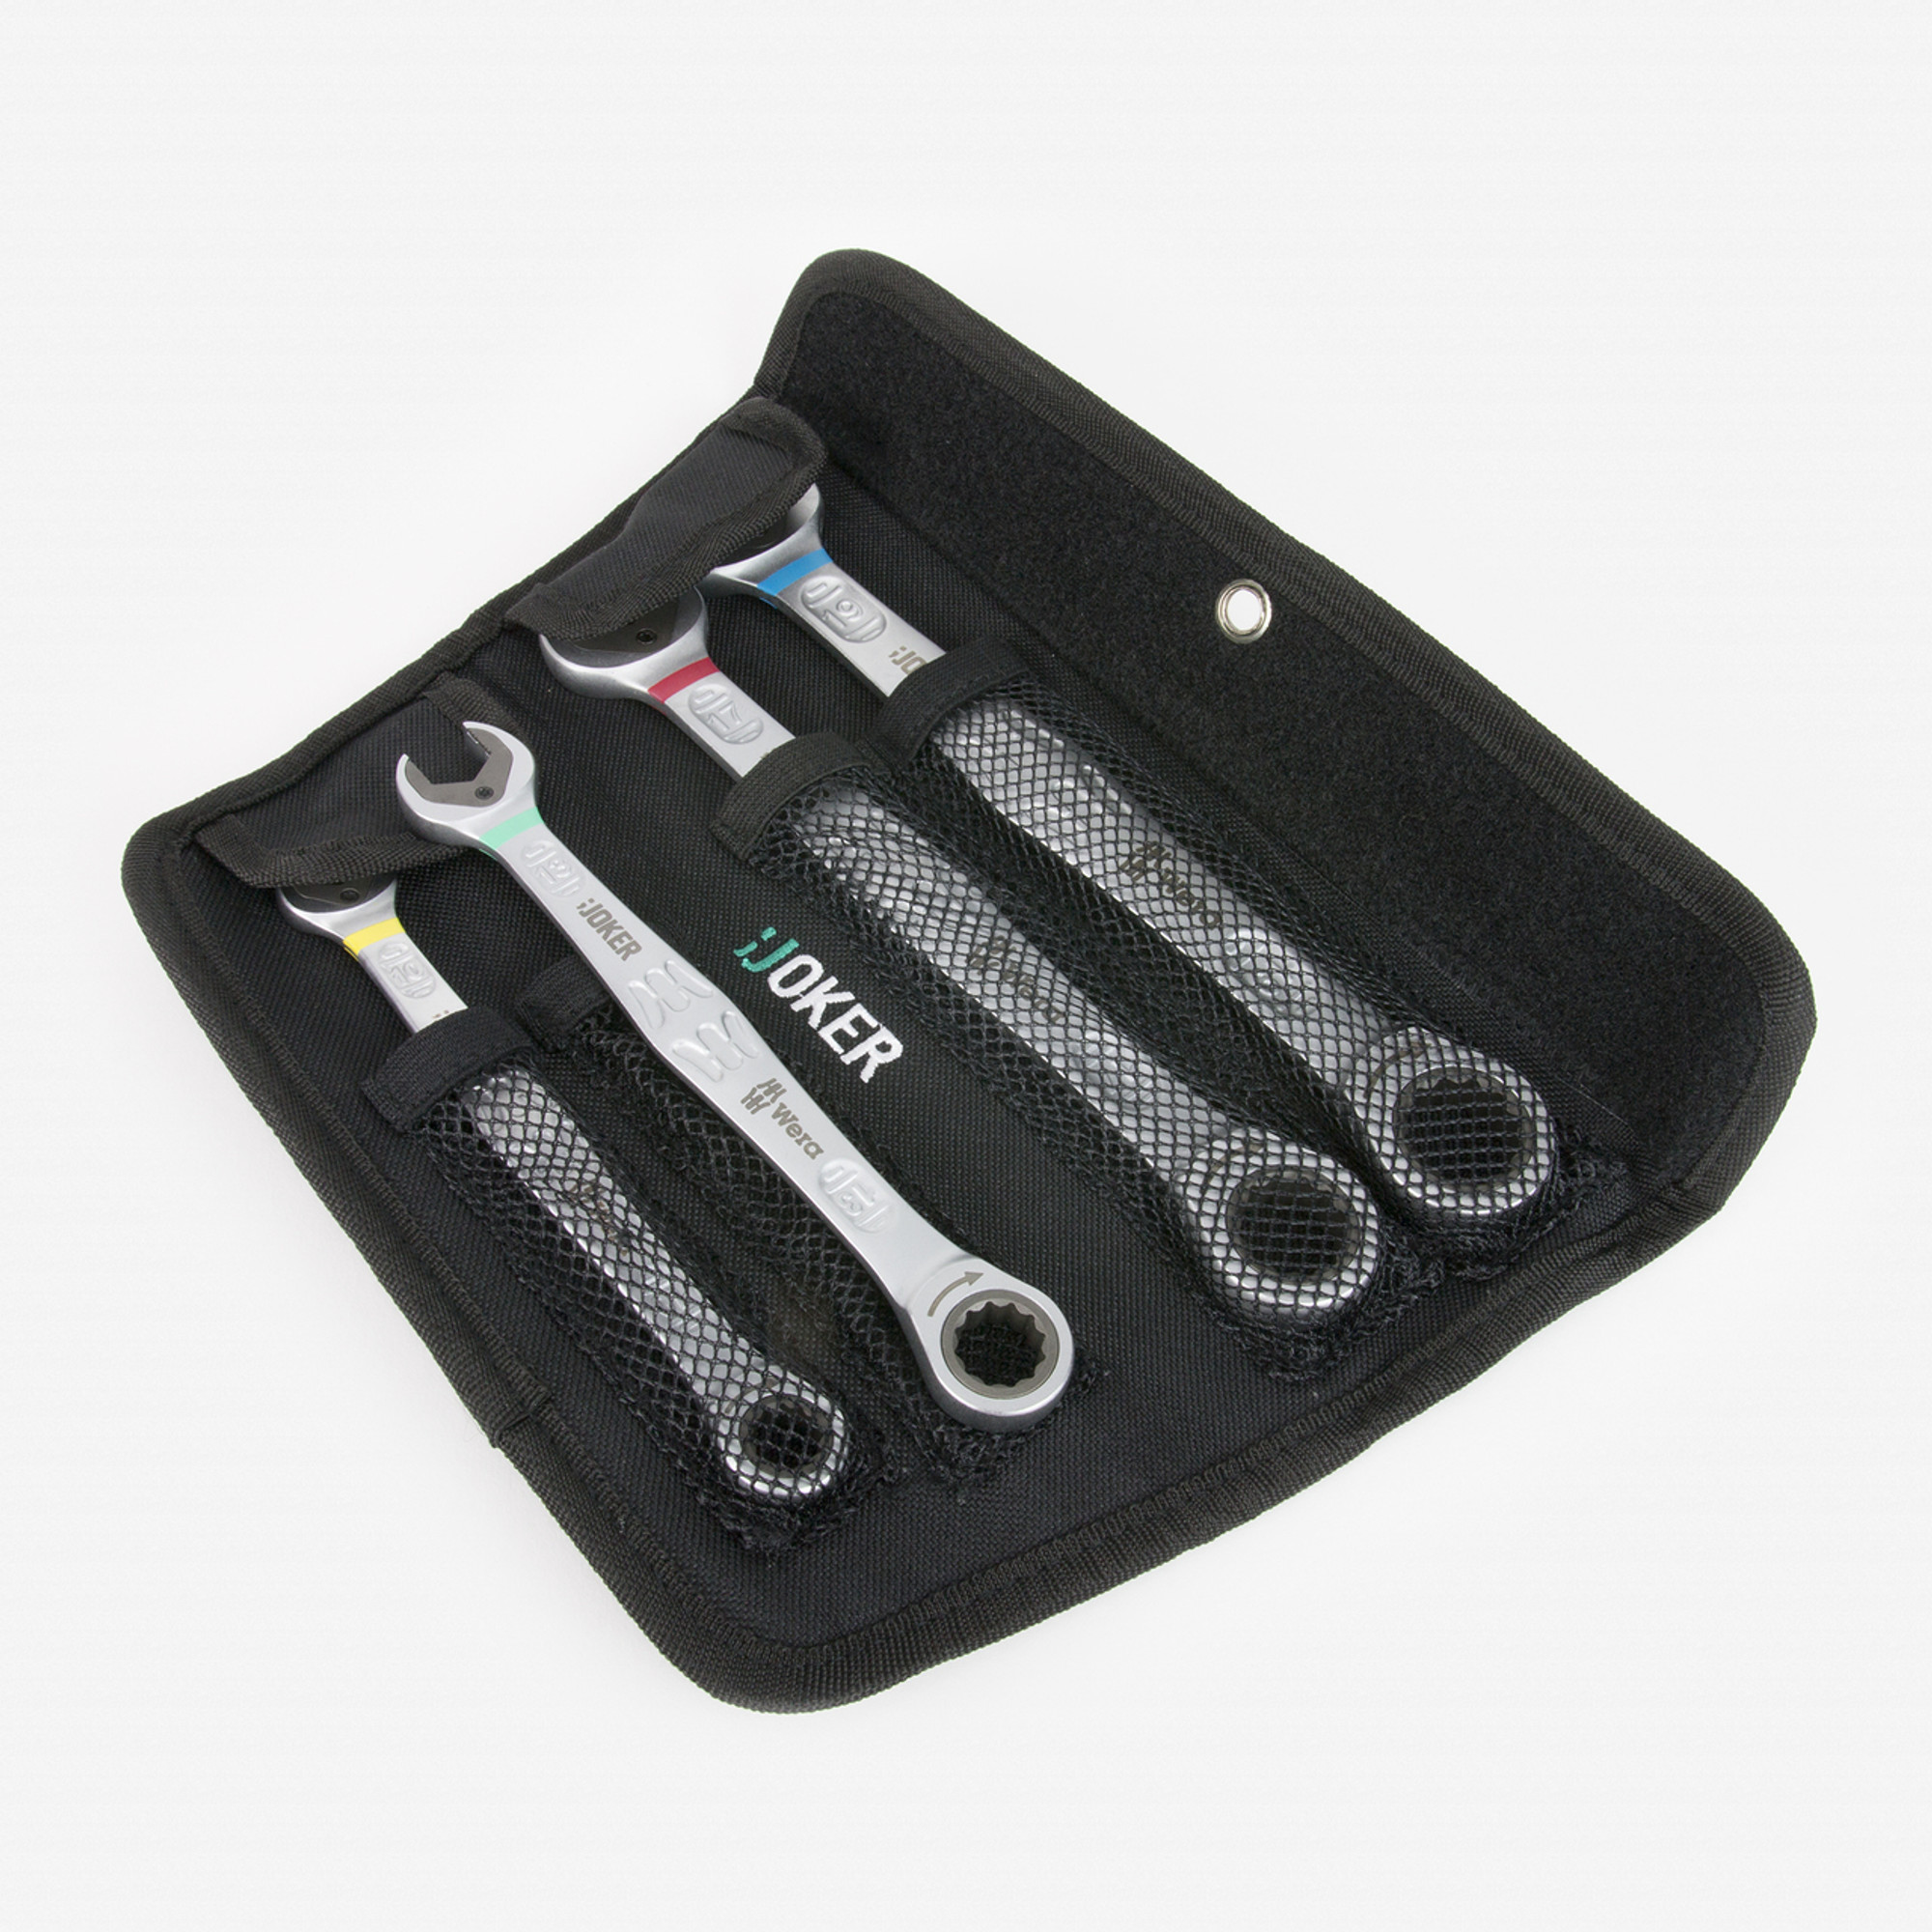 Wera Joker SAE (Imperial) Ratcheting Combination Wrench (4-Piece Set)